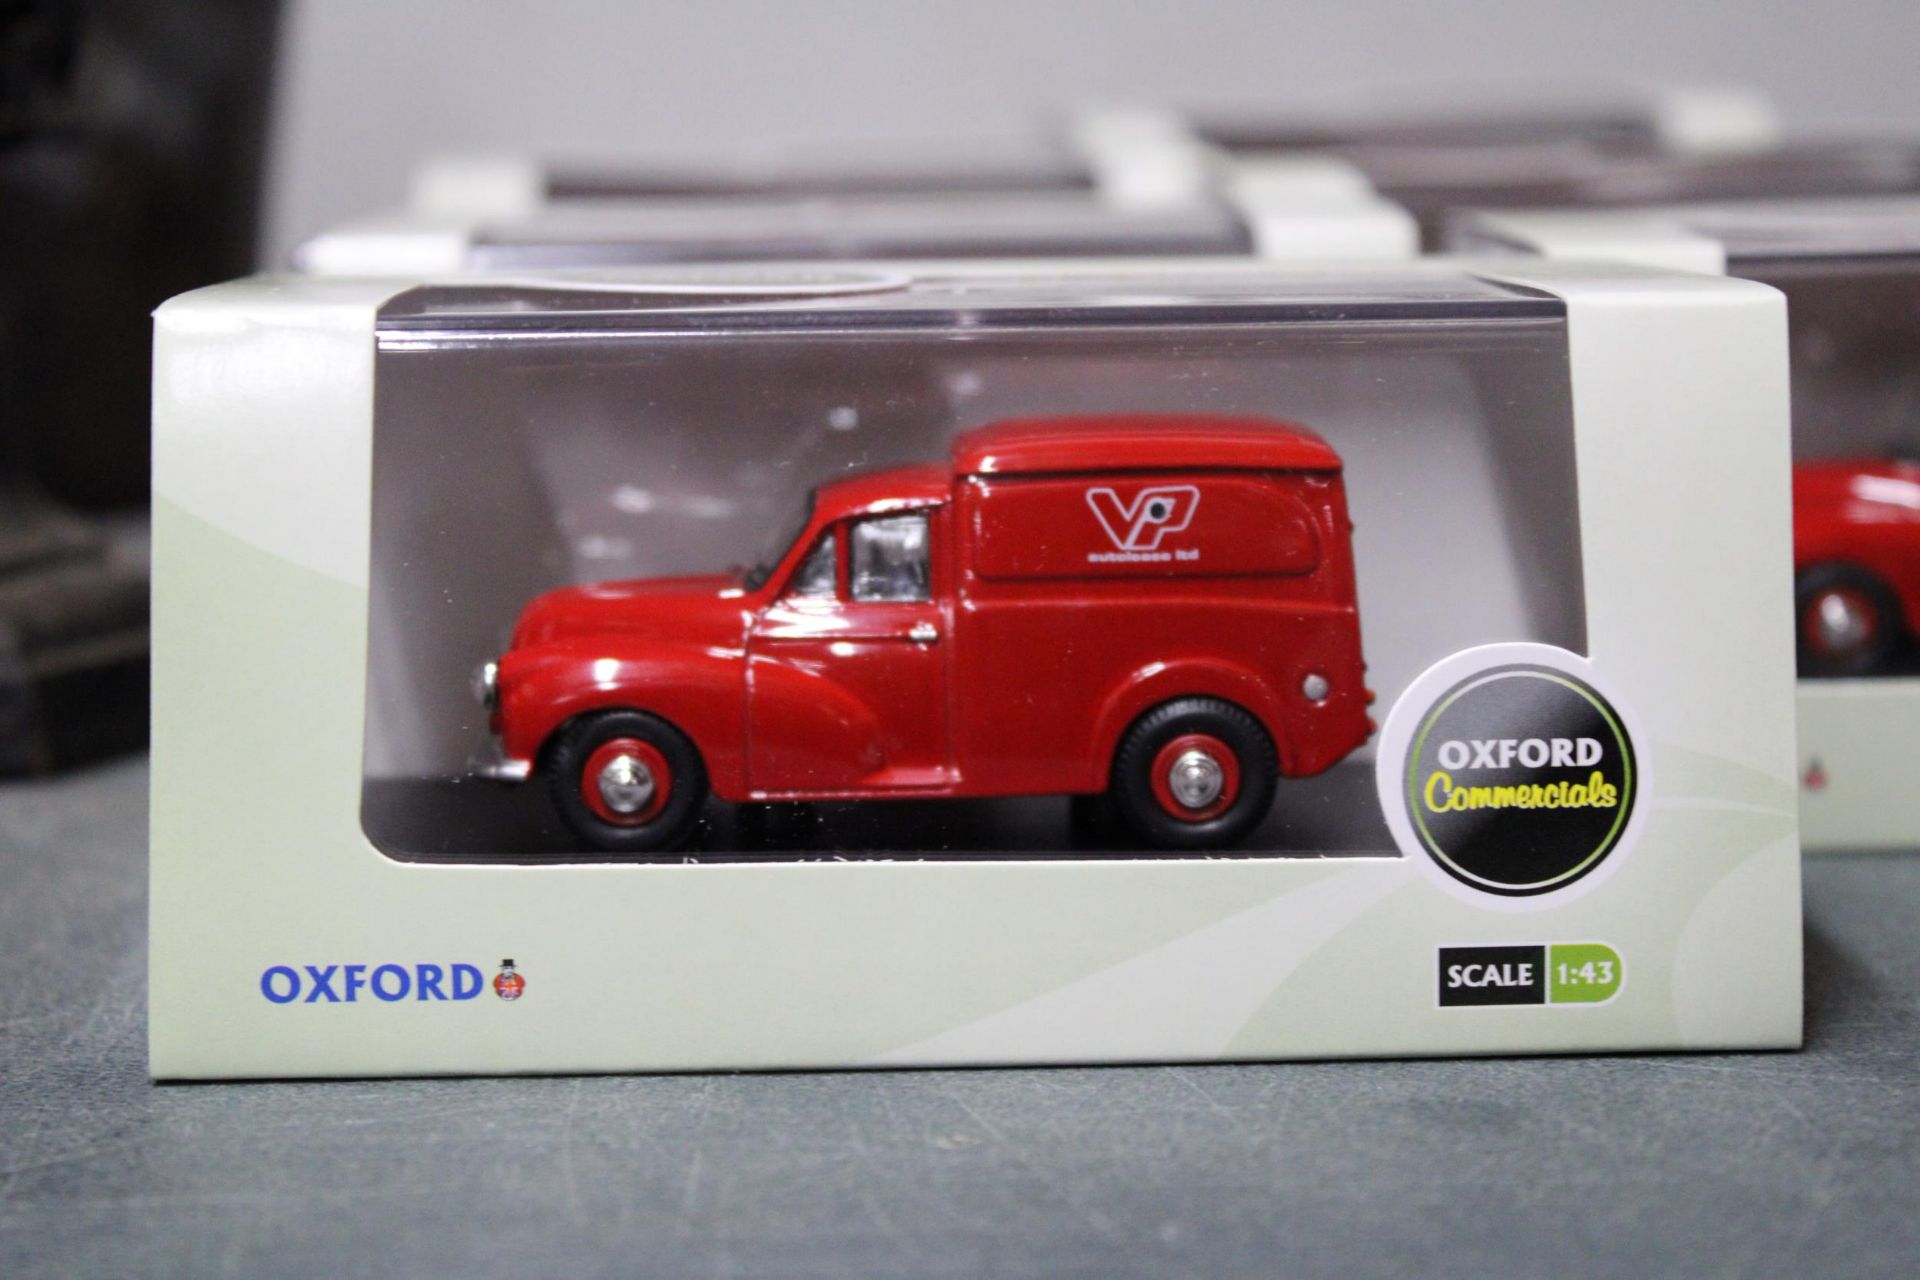 SIX OXFORD COMMERCIALS DIE-CAST VANS - AS NEW IN BOXES - Image 2 of 5